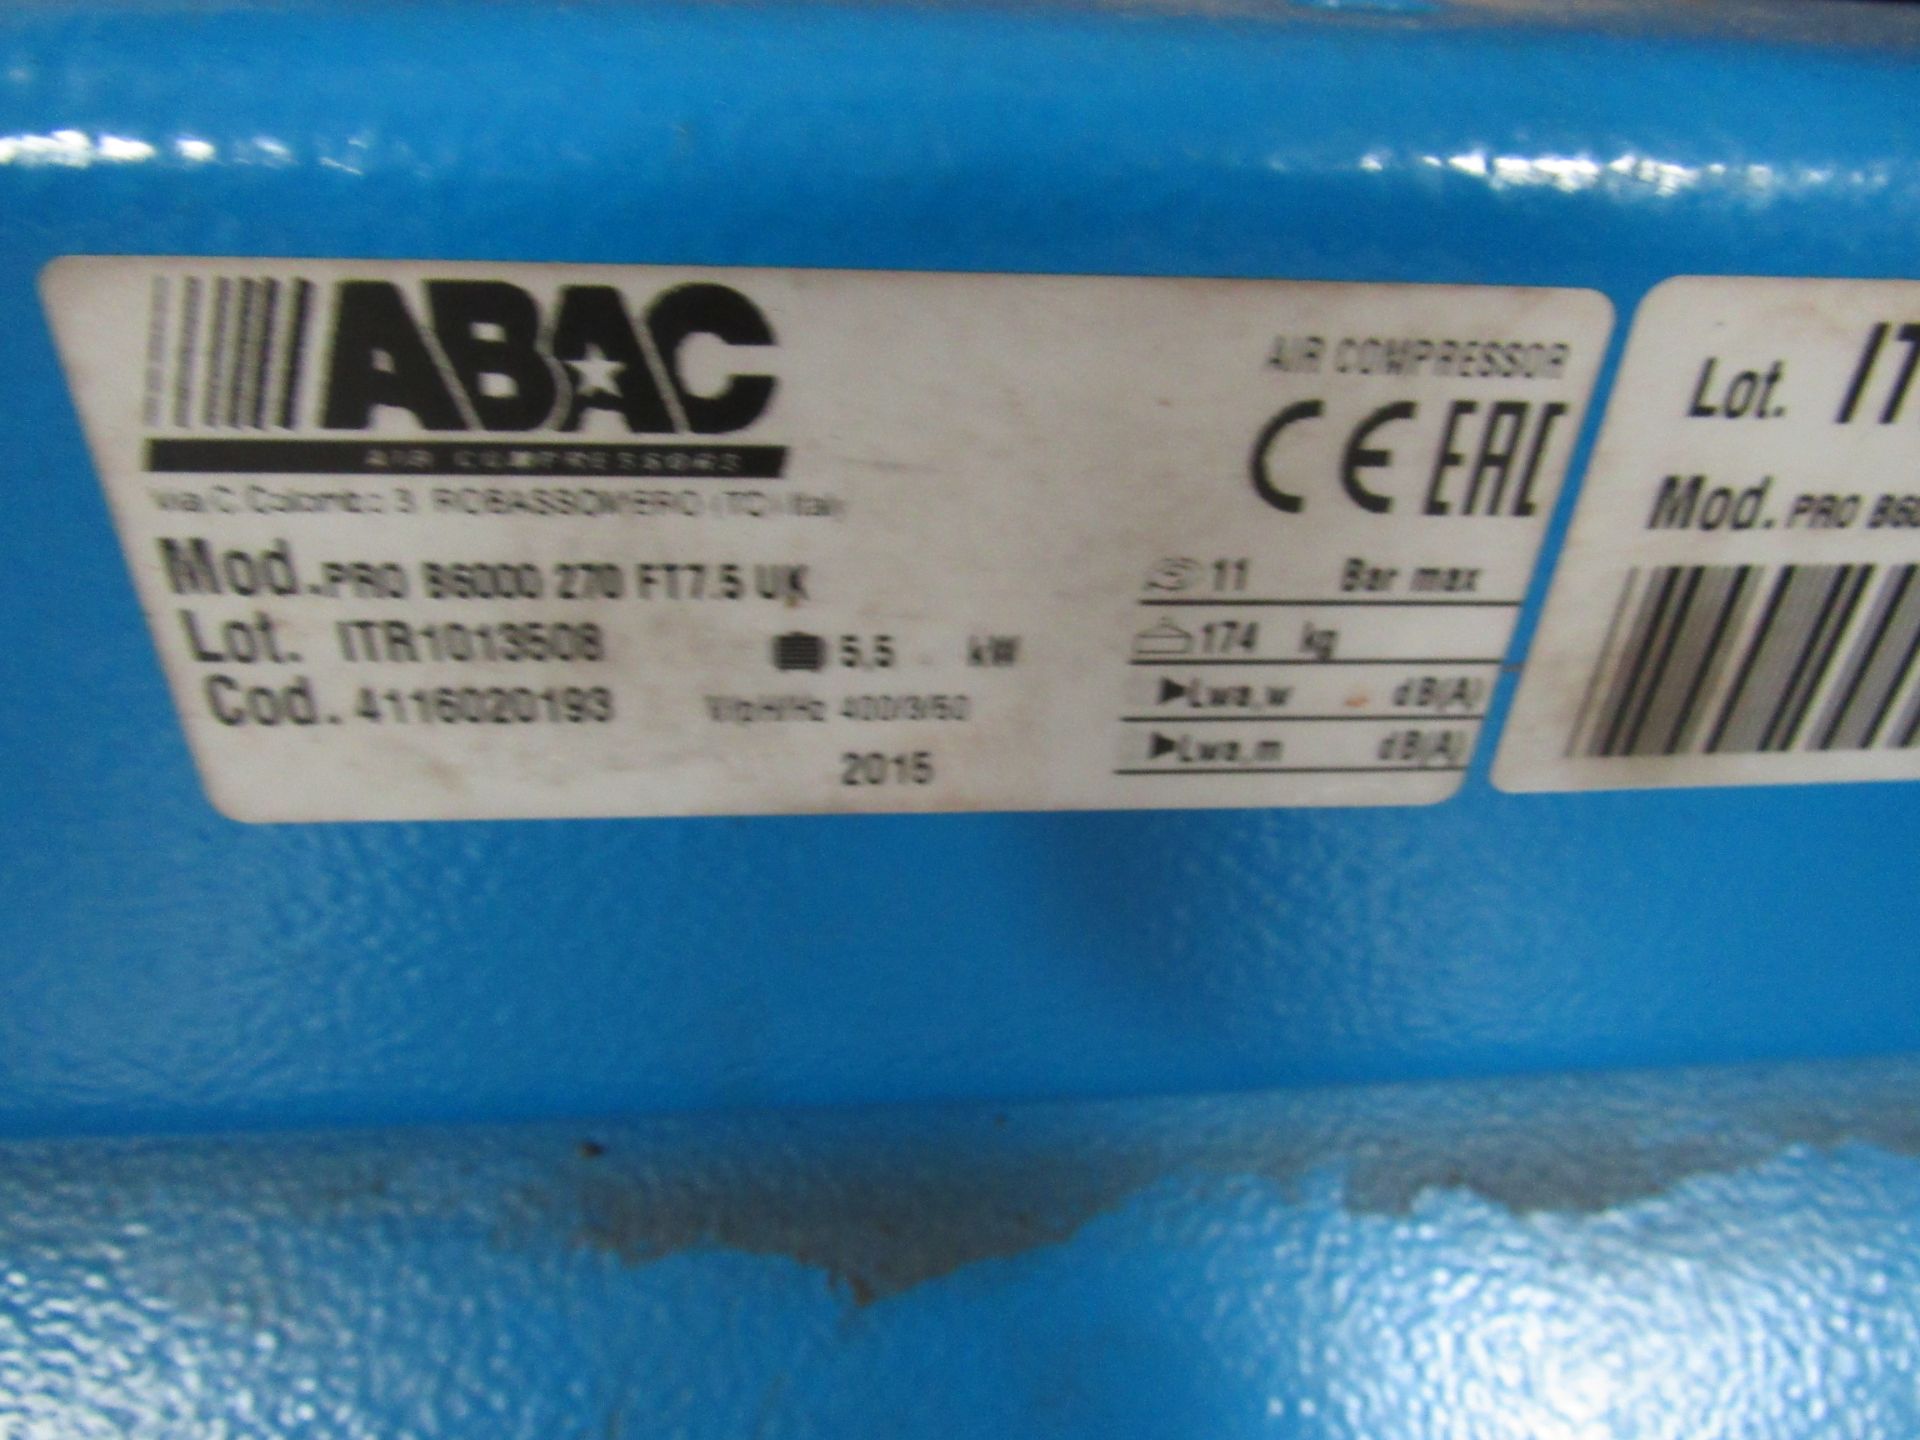 ABAC 270, 7.5HP Receiver Mounted Compressor, 2015 (Spares or Repairs) (Located at Unit 11) - Image 2 of 3